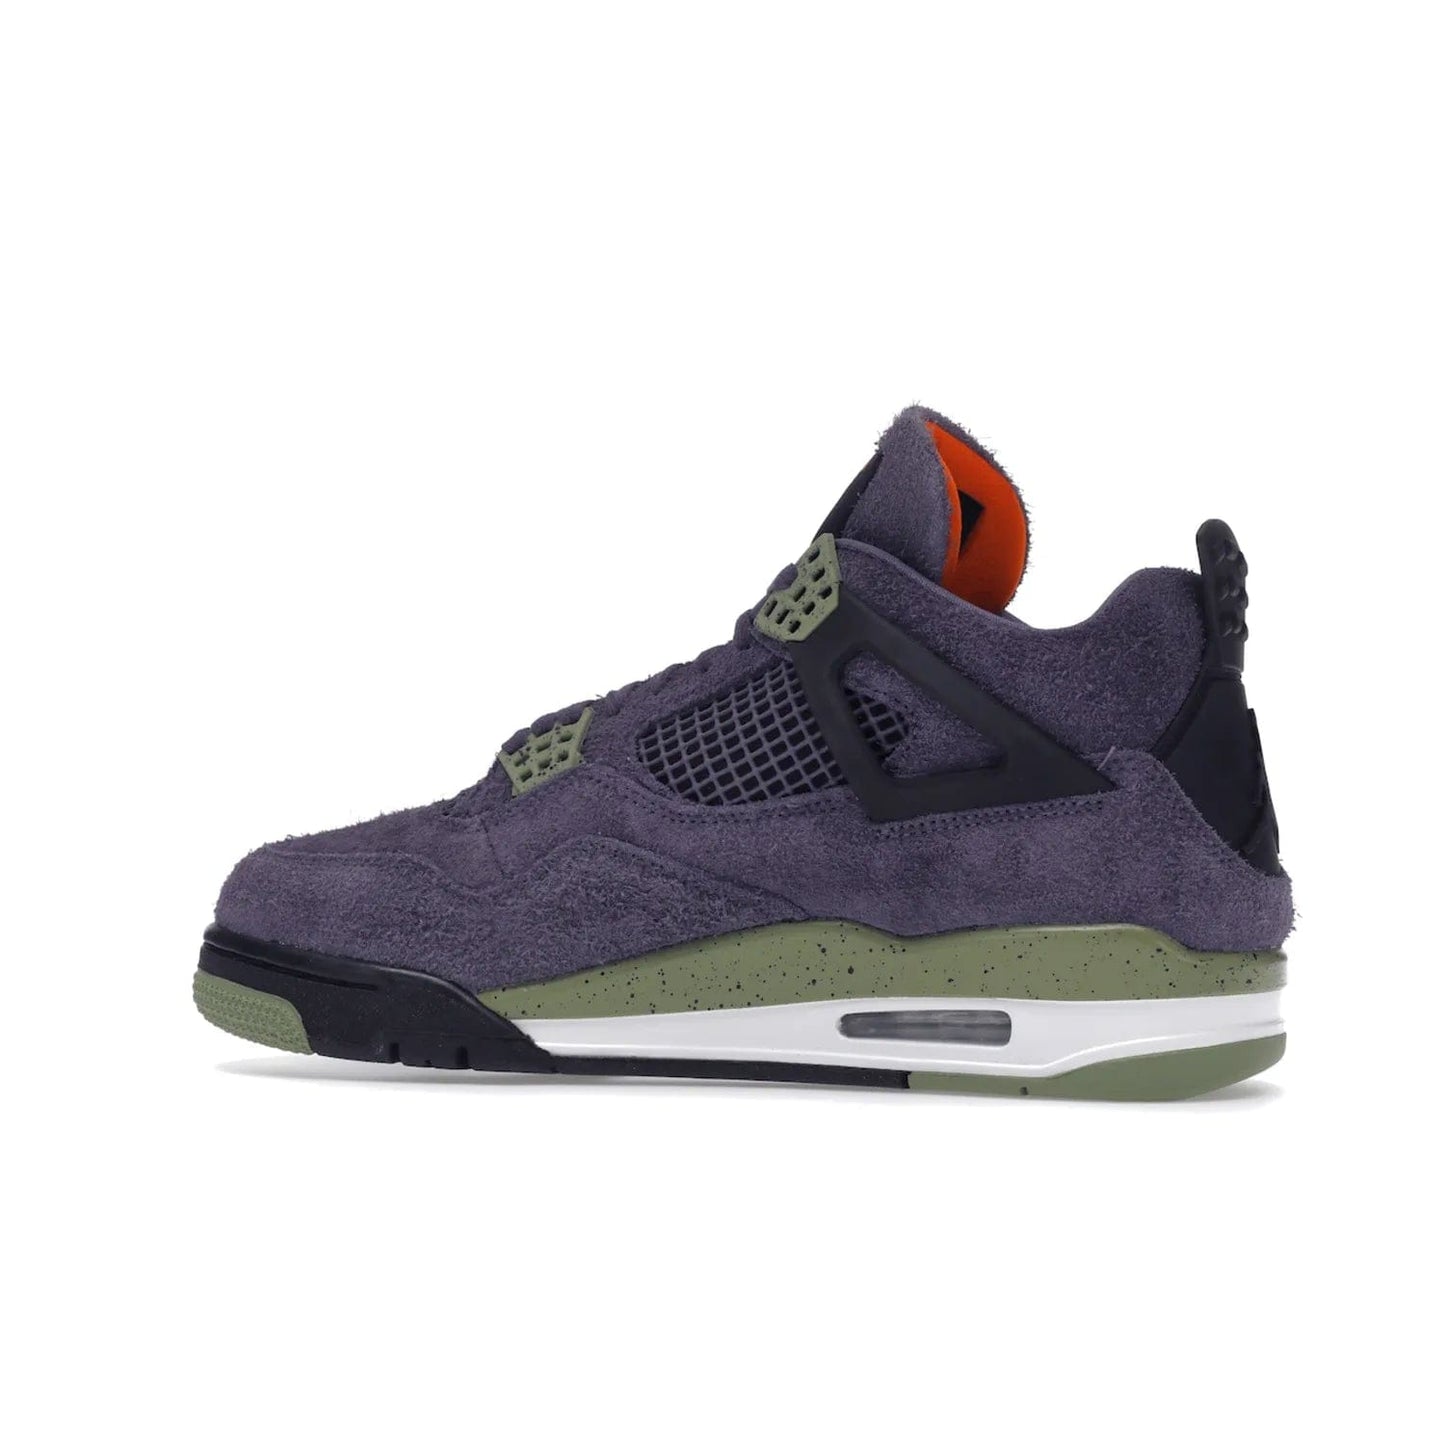 Jordan 4 Retro Canyon Purple (Women's) - Image 21 - Only at www.BallersClubKickz.com - New Air Jordan 4 Retro Canyon Purple W sneaker features shaggy purple suede, lime highlights & safety orange Jumpman branding. Classic ankle-hugging silhouette with modern colors released 15/10/2022.